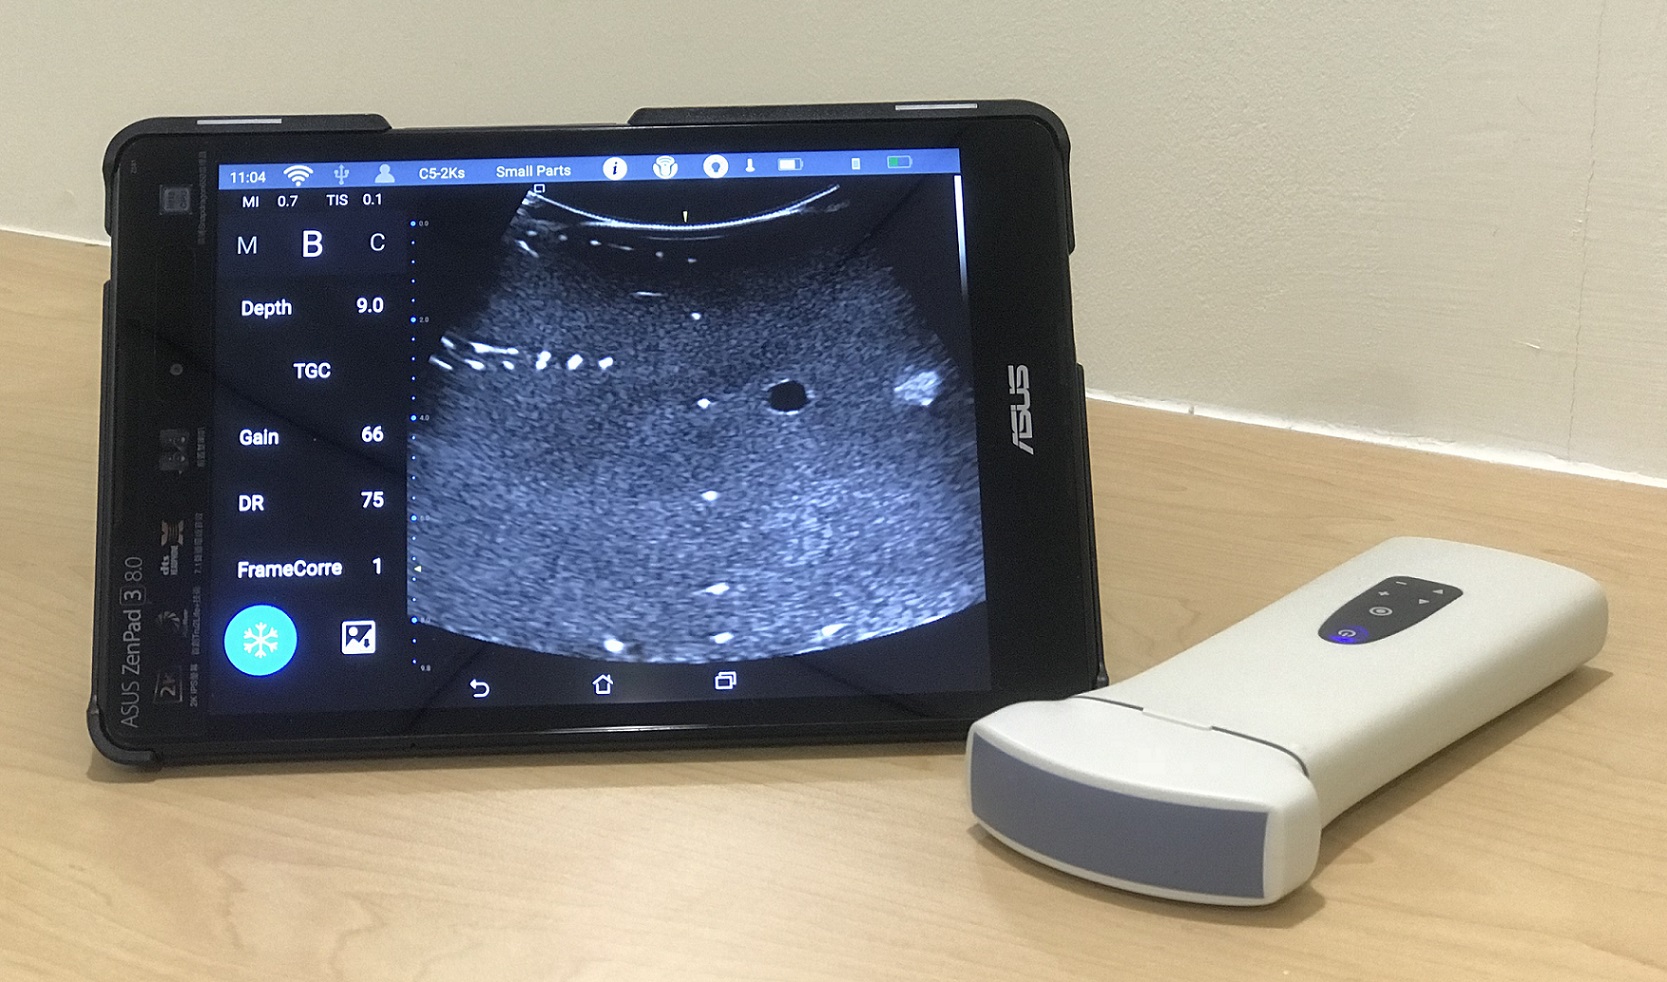 FattyTouch: an ultrasound system dedicated to fatty liver screening